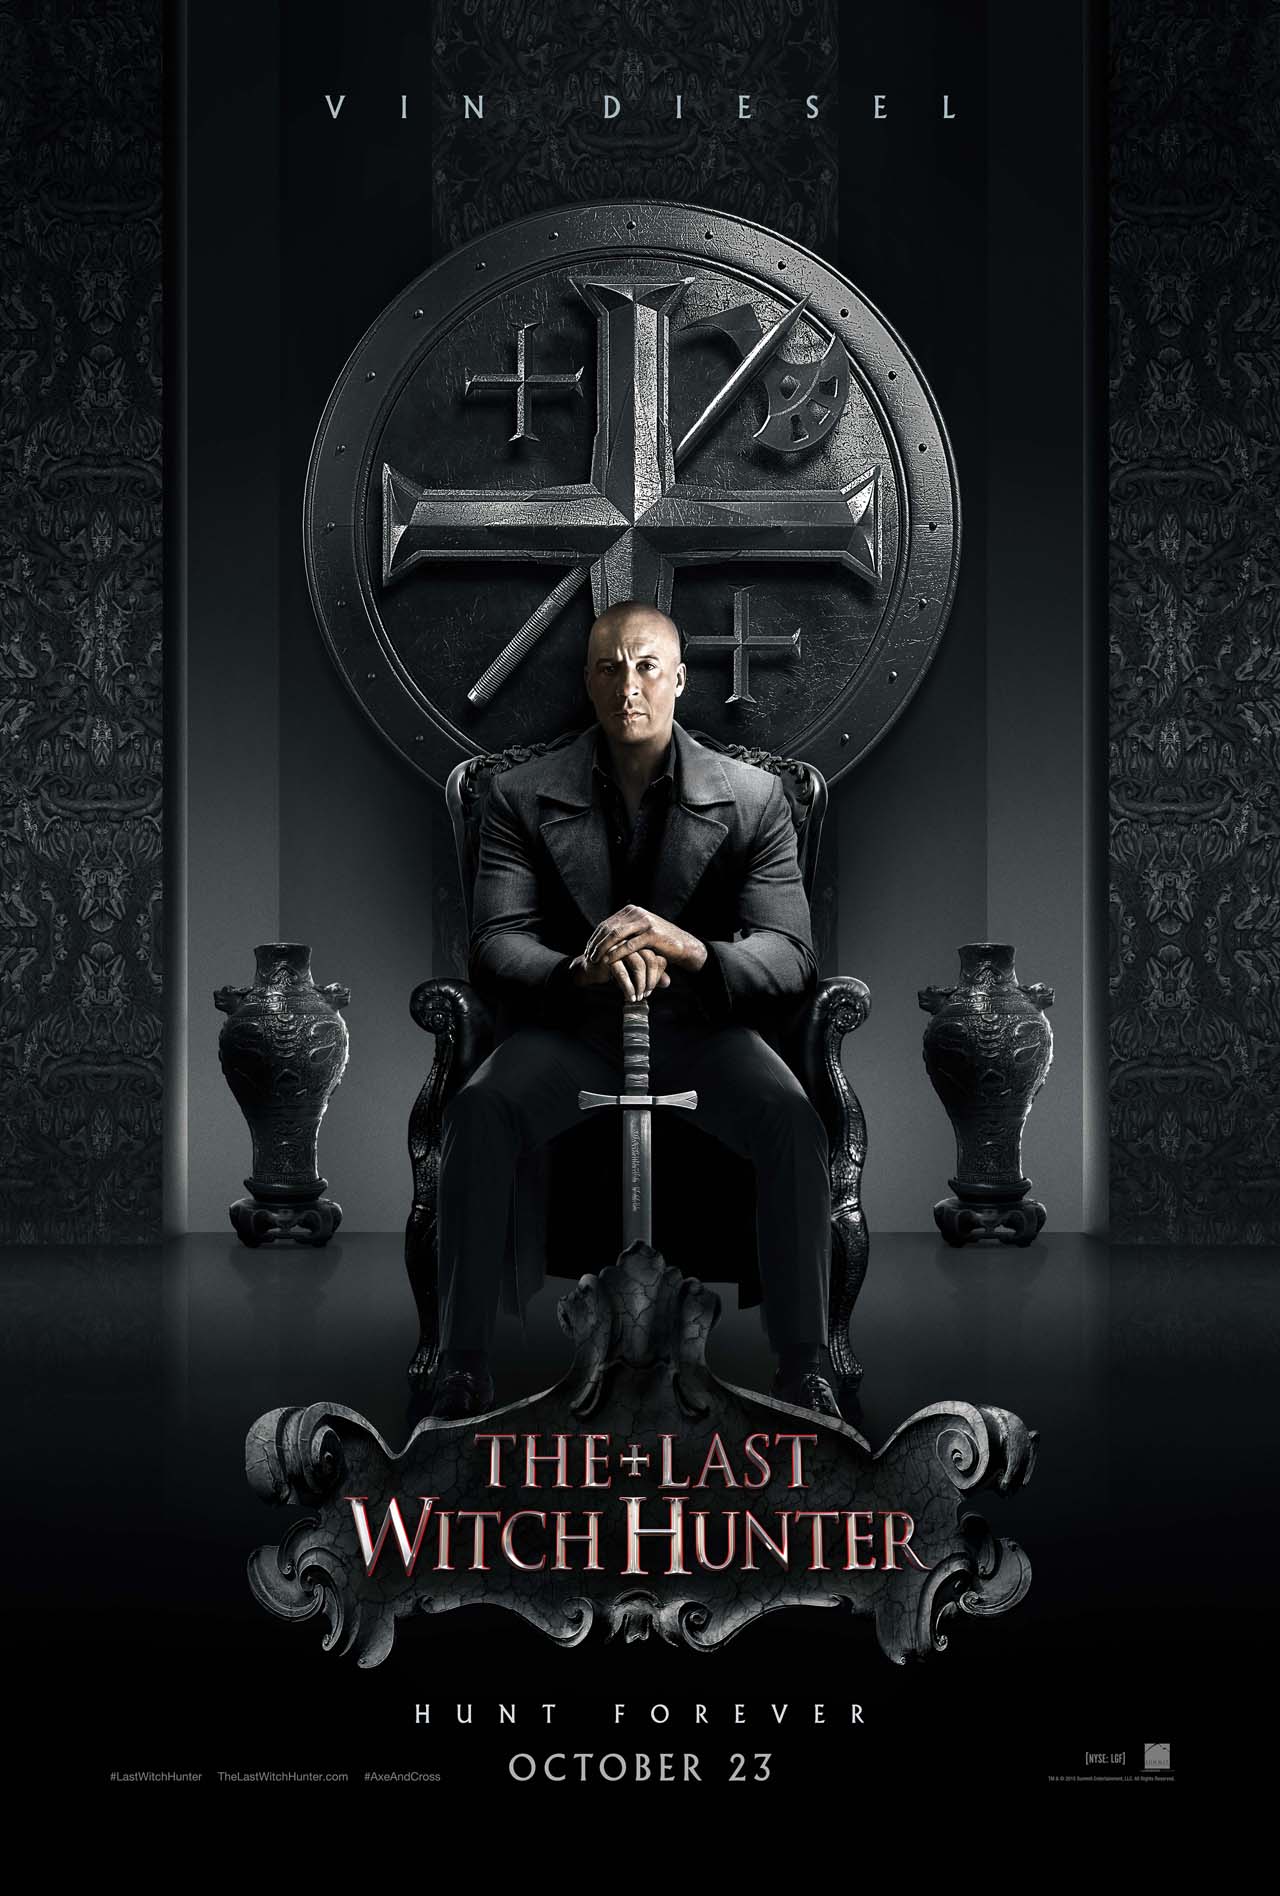 The Witchhunter